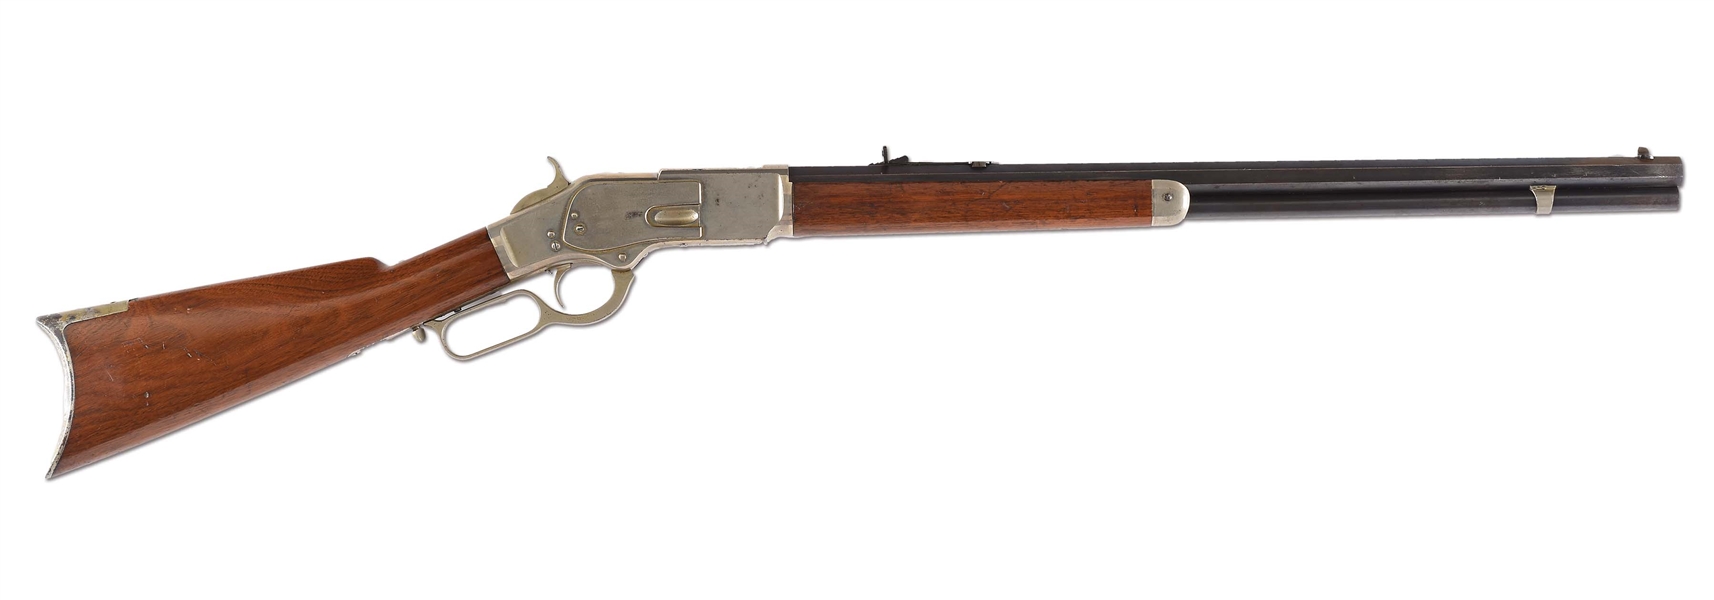 (A)  RARE  DOCUMENTED WINCHESTER 1ST MODEL 1873 WITH HALF NICKEL FINISH